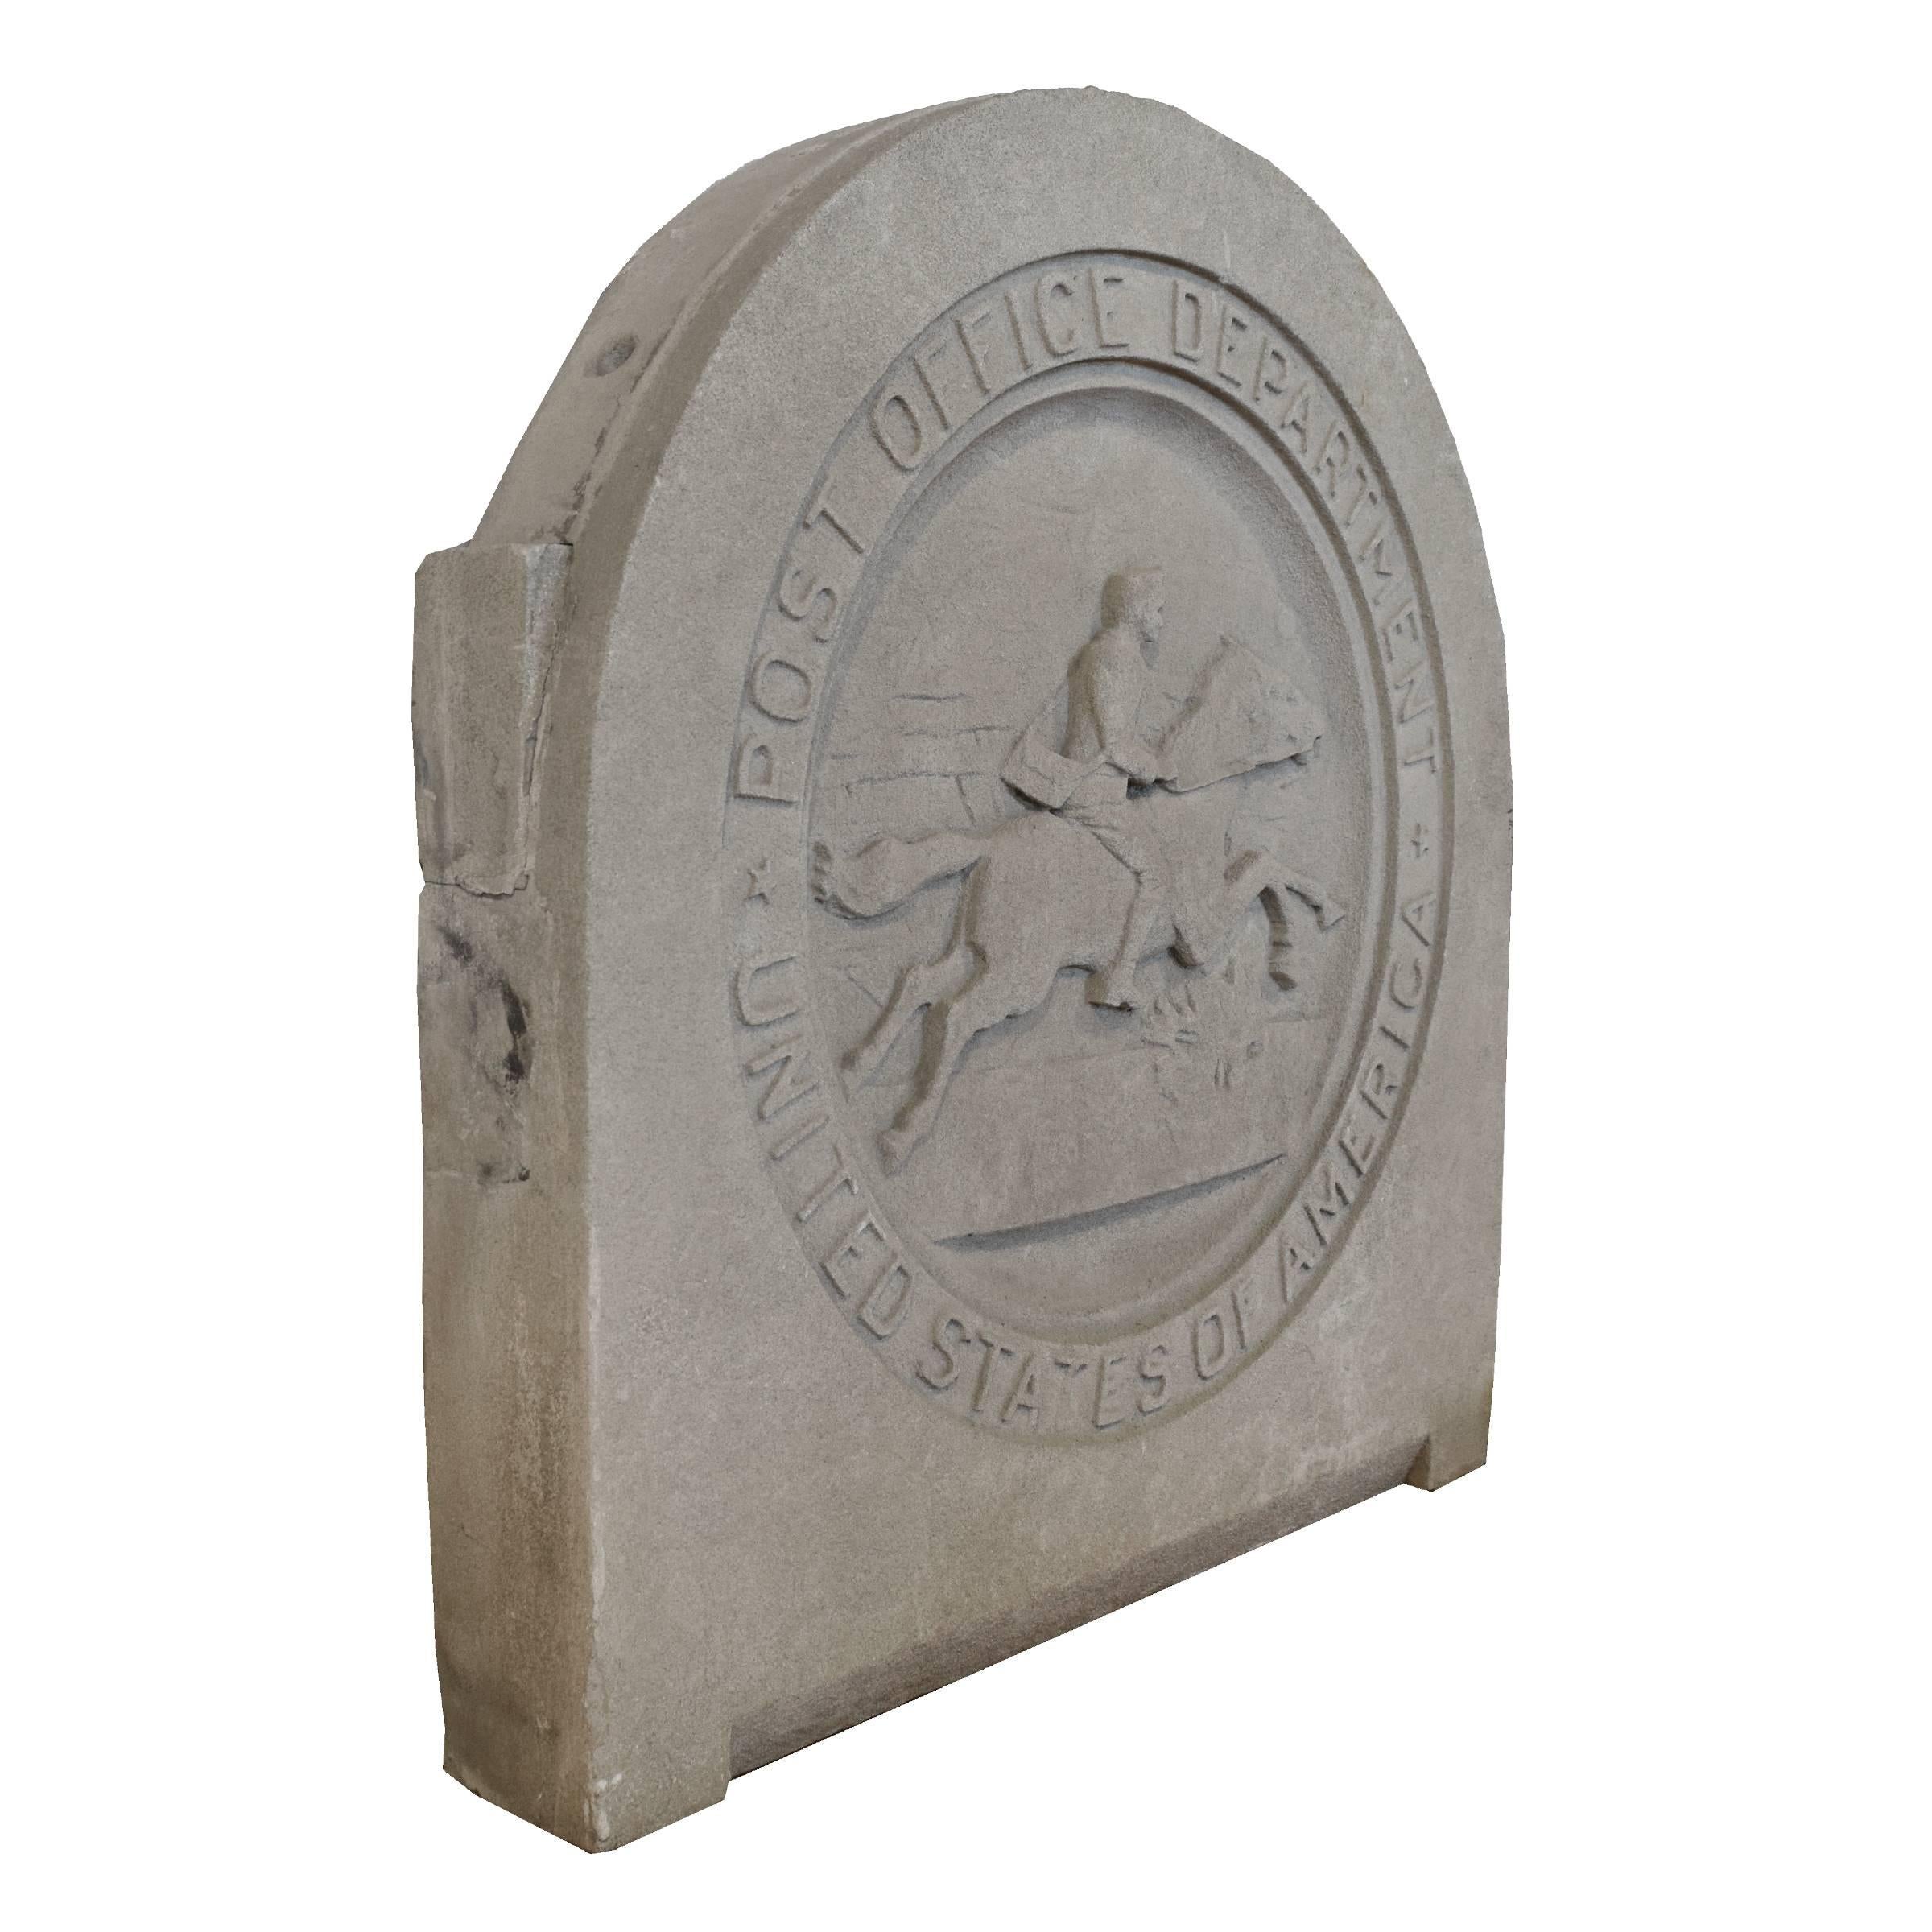 A carved limestone roundel with a carving of a man on horseback, depicting the Pony Express. This piece came from a post office in Chicago's Uptown neighbourhood.